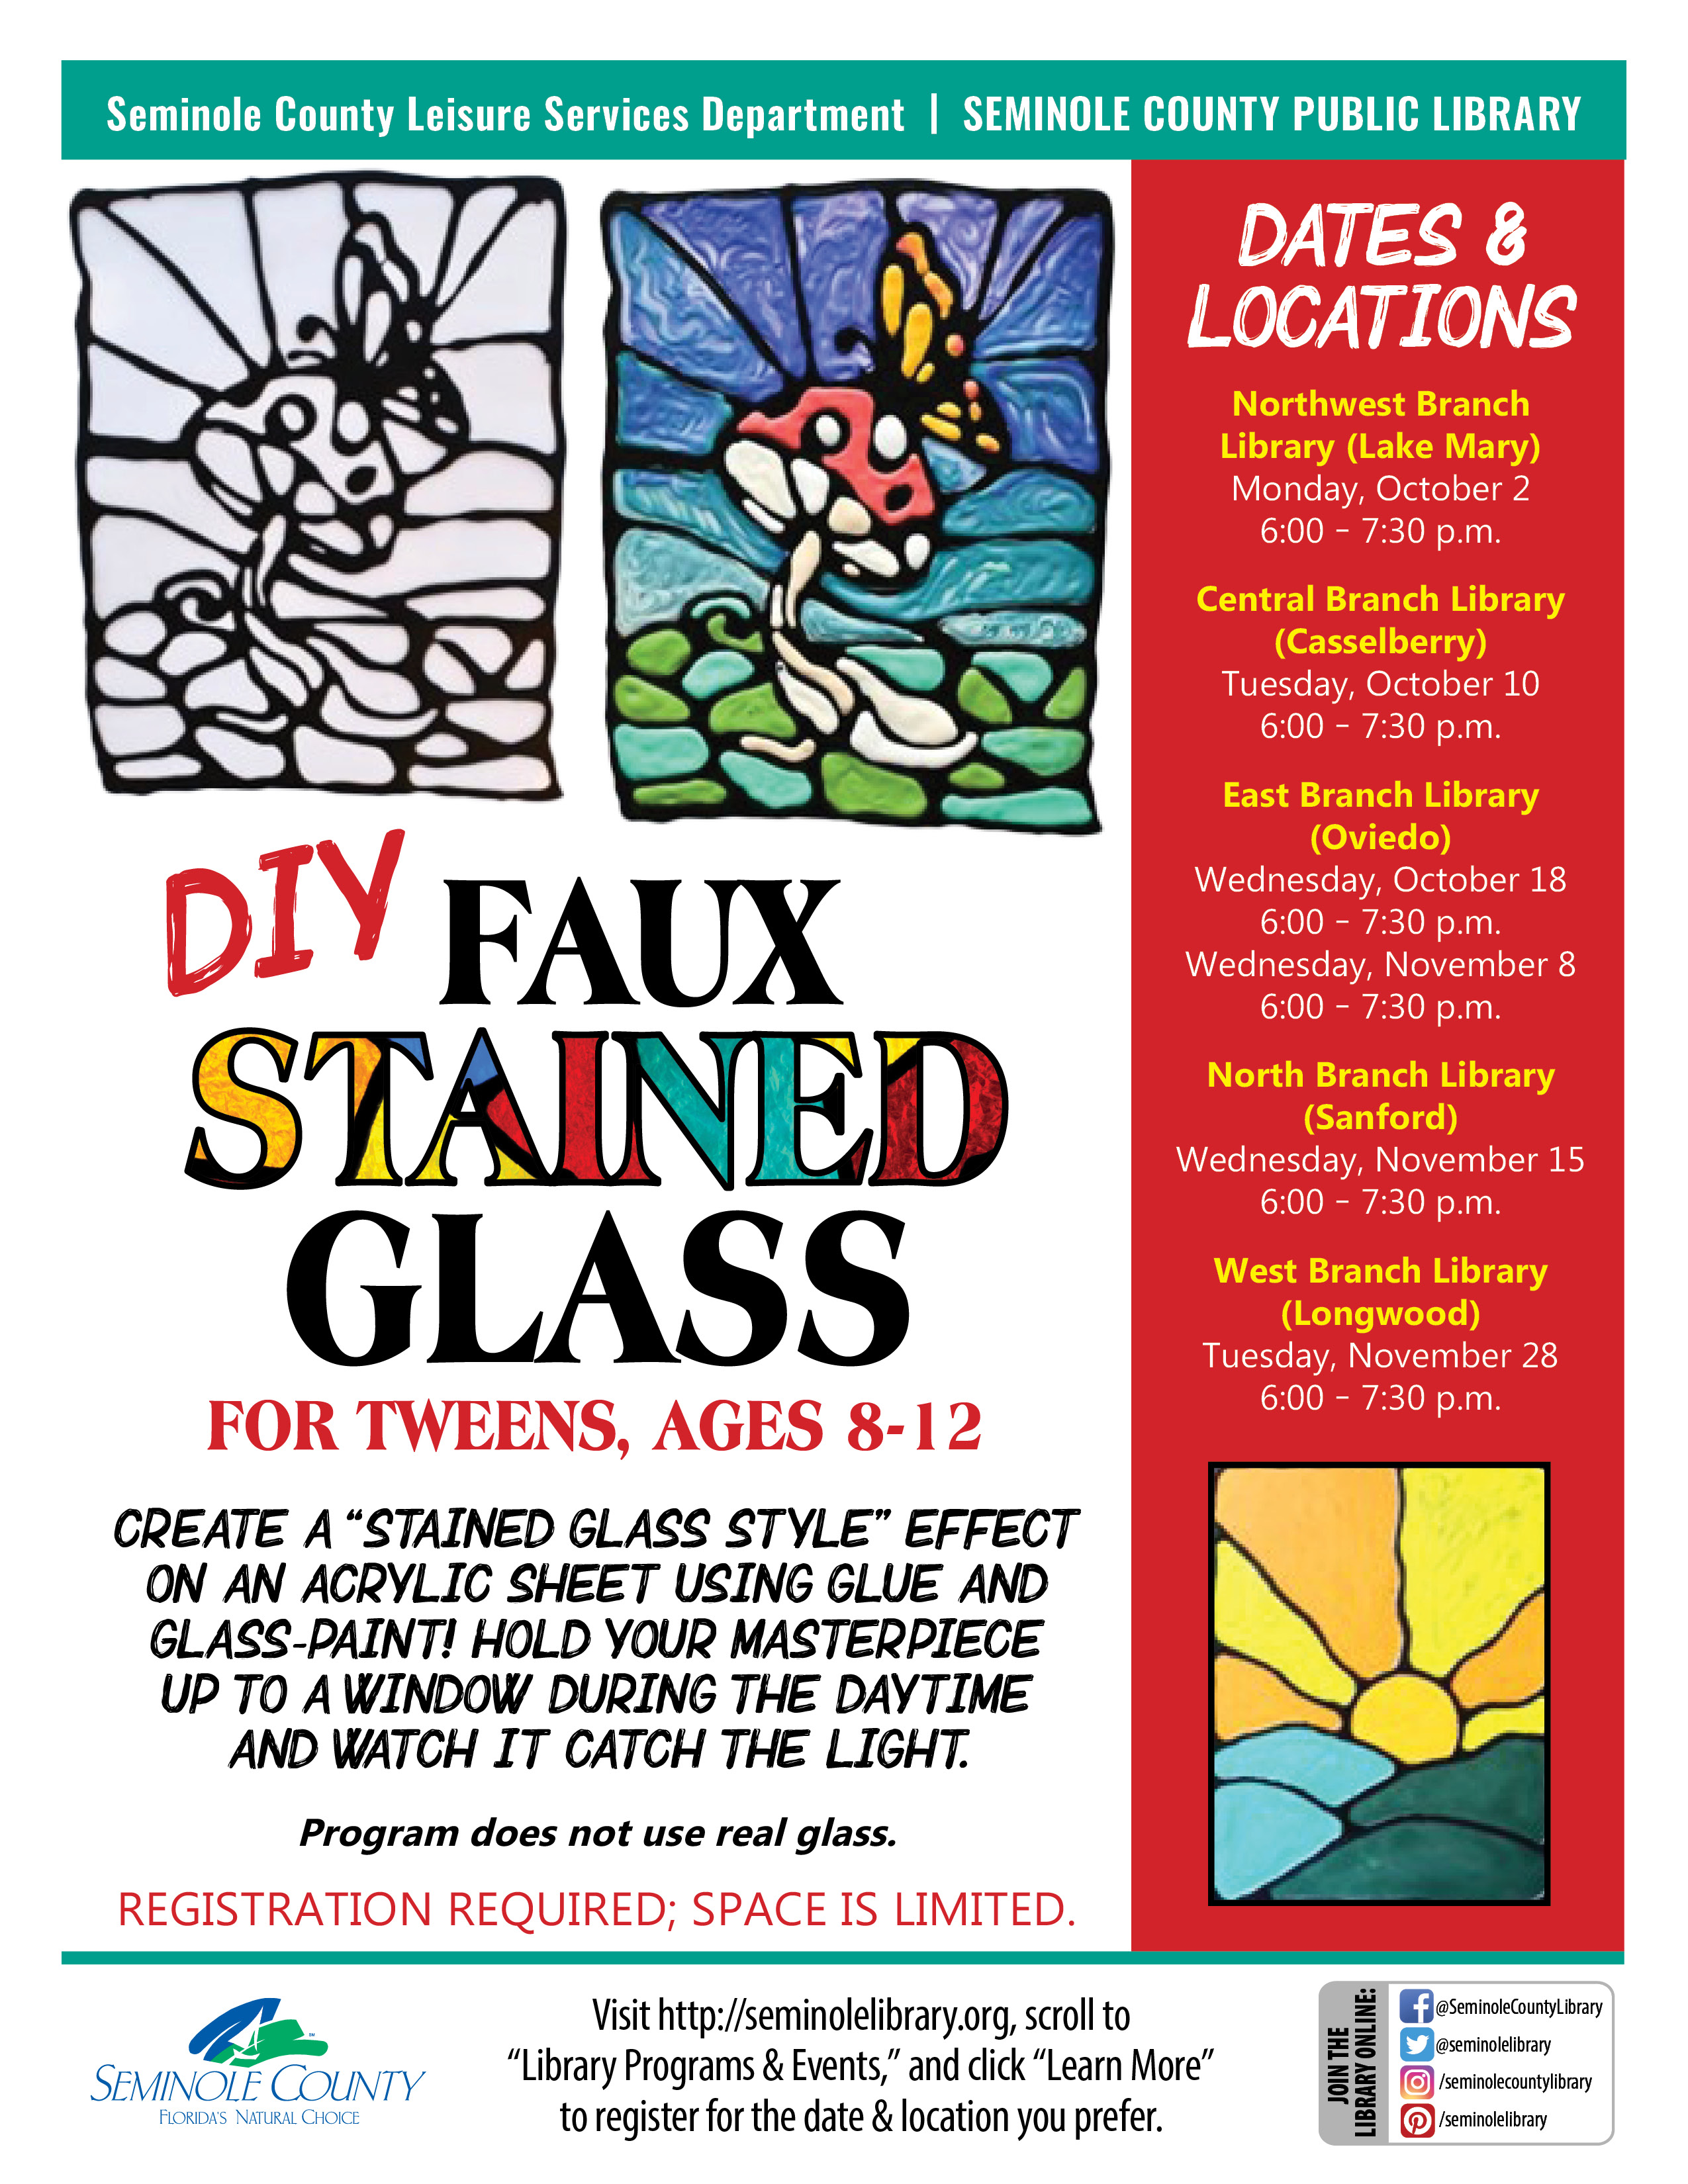 DIY Faux Stained Glass for Tweens